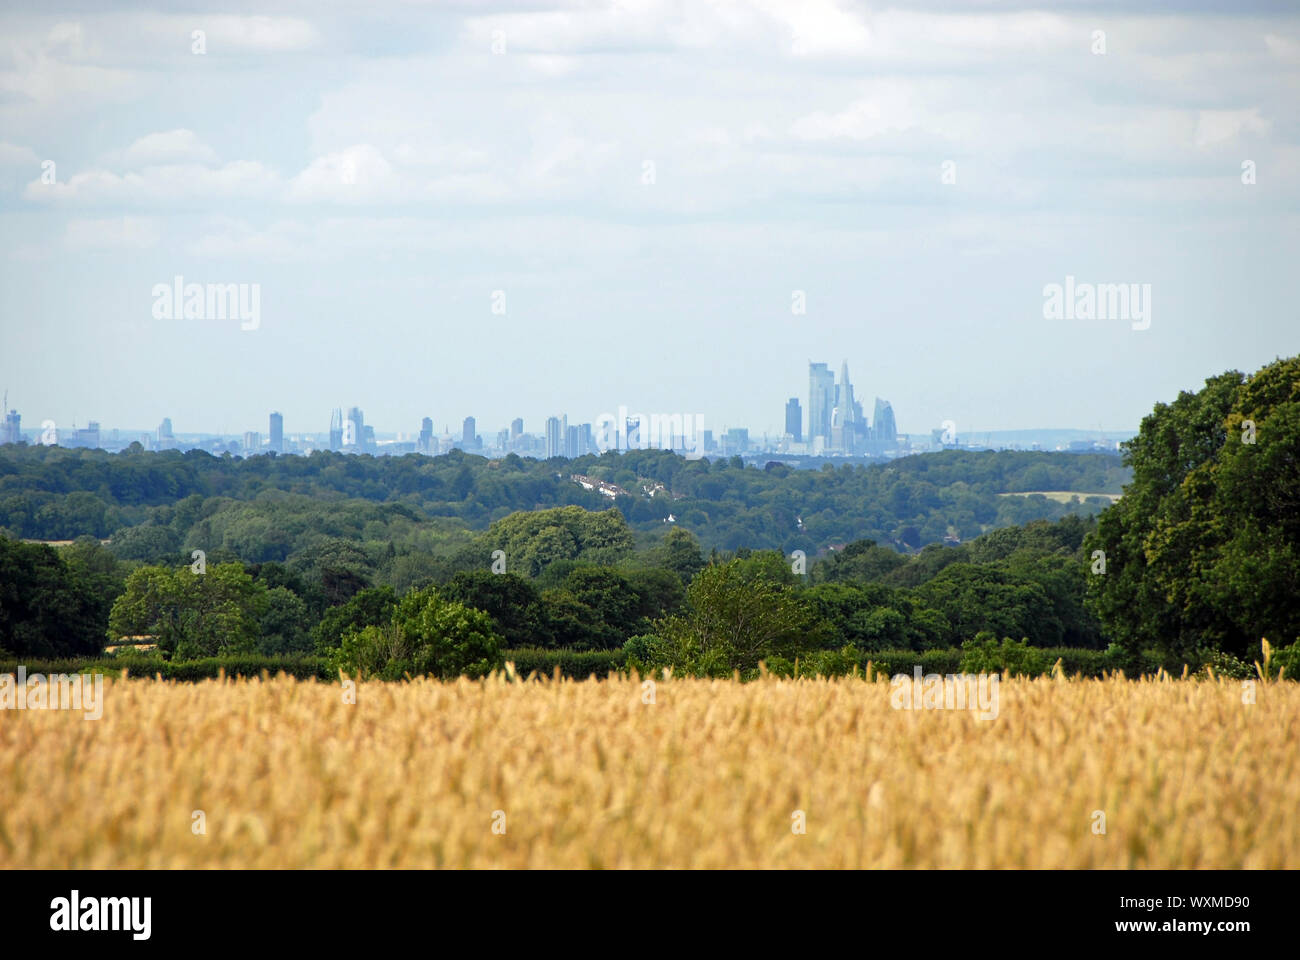 London from the North Downs at Reigate, Surrey. London skyline with fields. London is surrounded by a green belt of woods and fields. View of London. Stock Photo